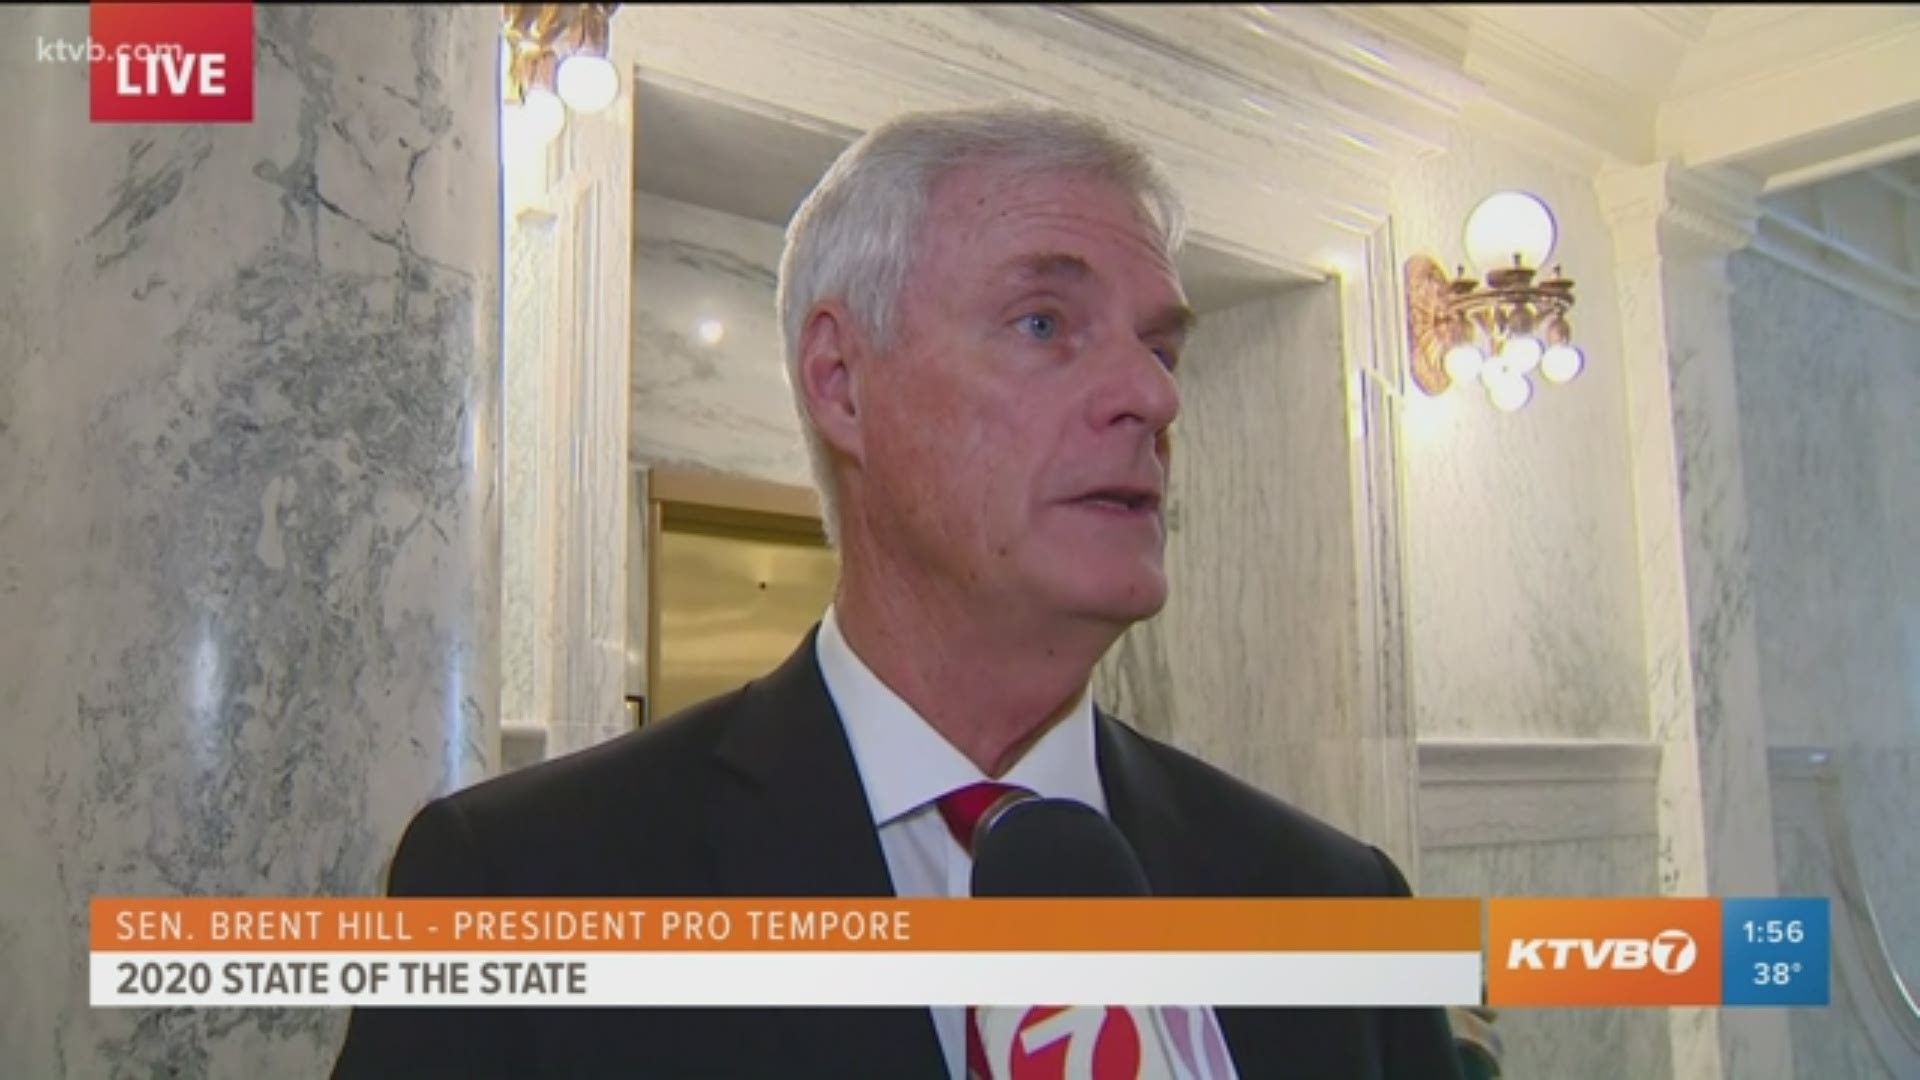 The Republican State Senator spoke to KTVB about what he thought of Brad Little's State of the State address.